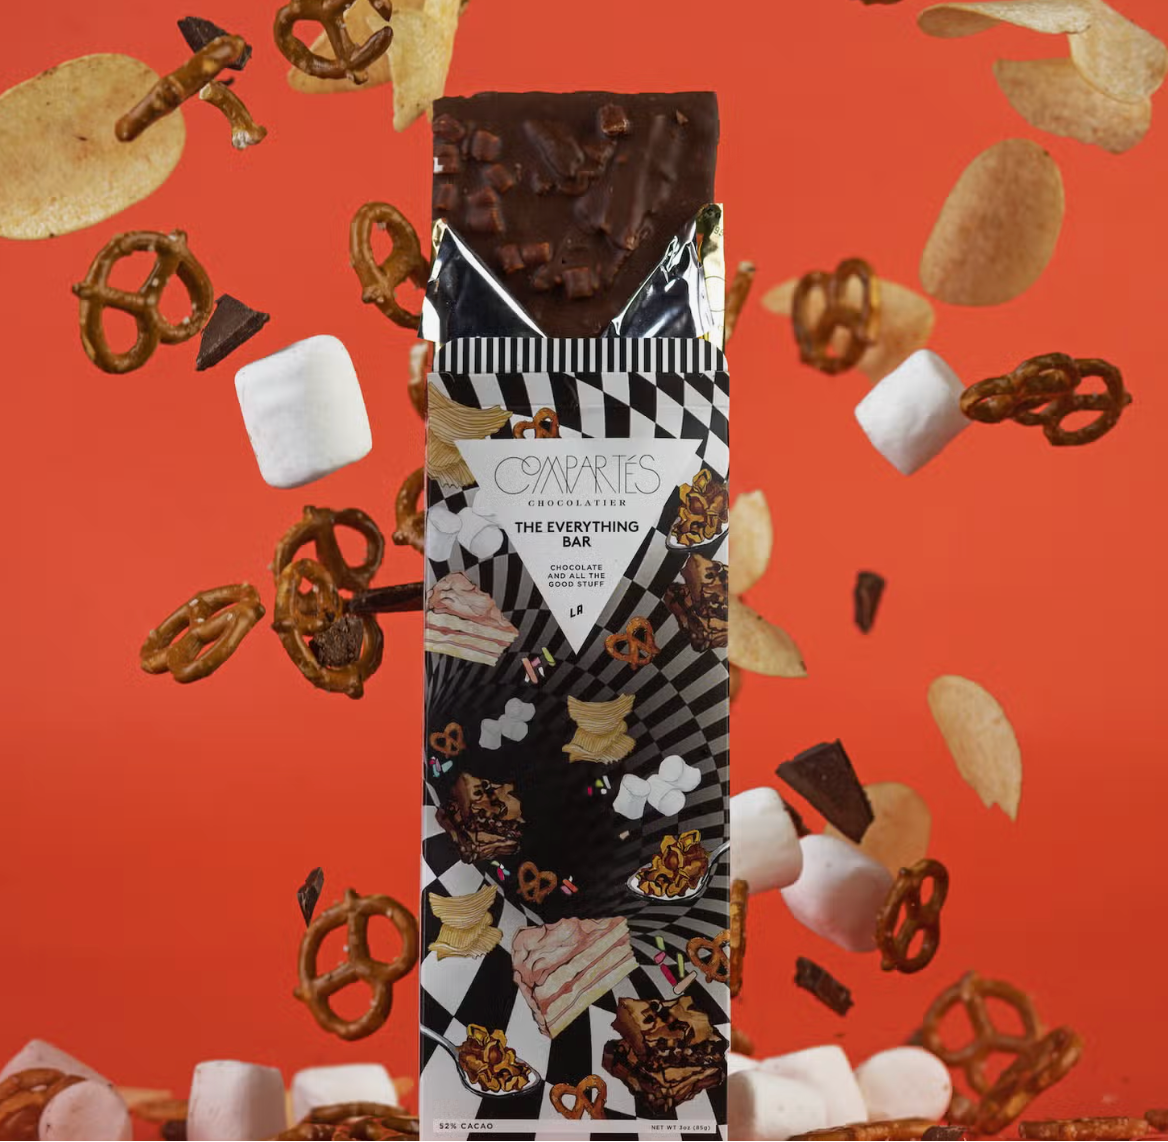 Indulge in the decadence of The Everything Chocolate Bar by Compartés, a heavenly treat now available in Me To You Box's customizable gift collection.